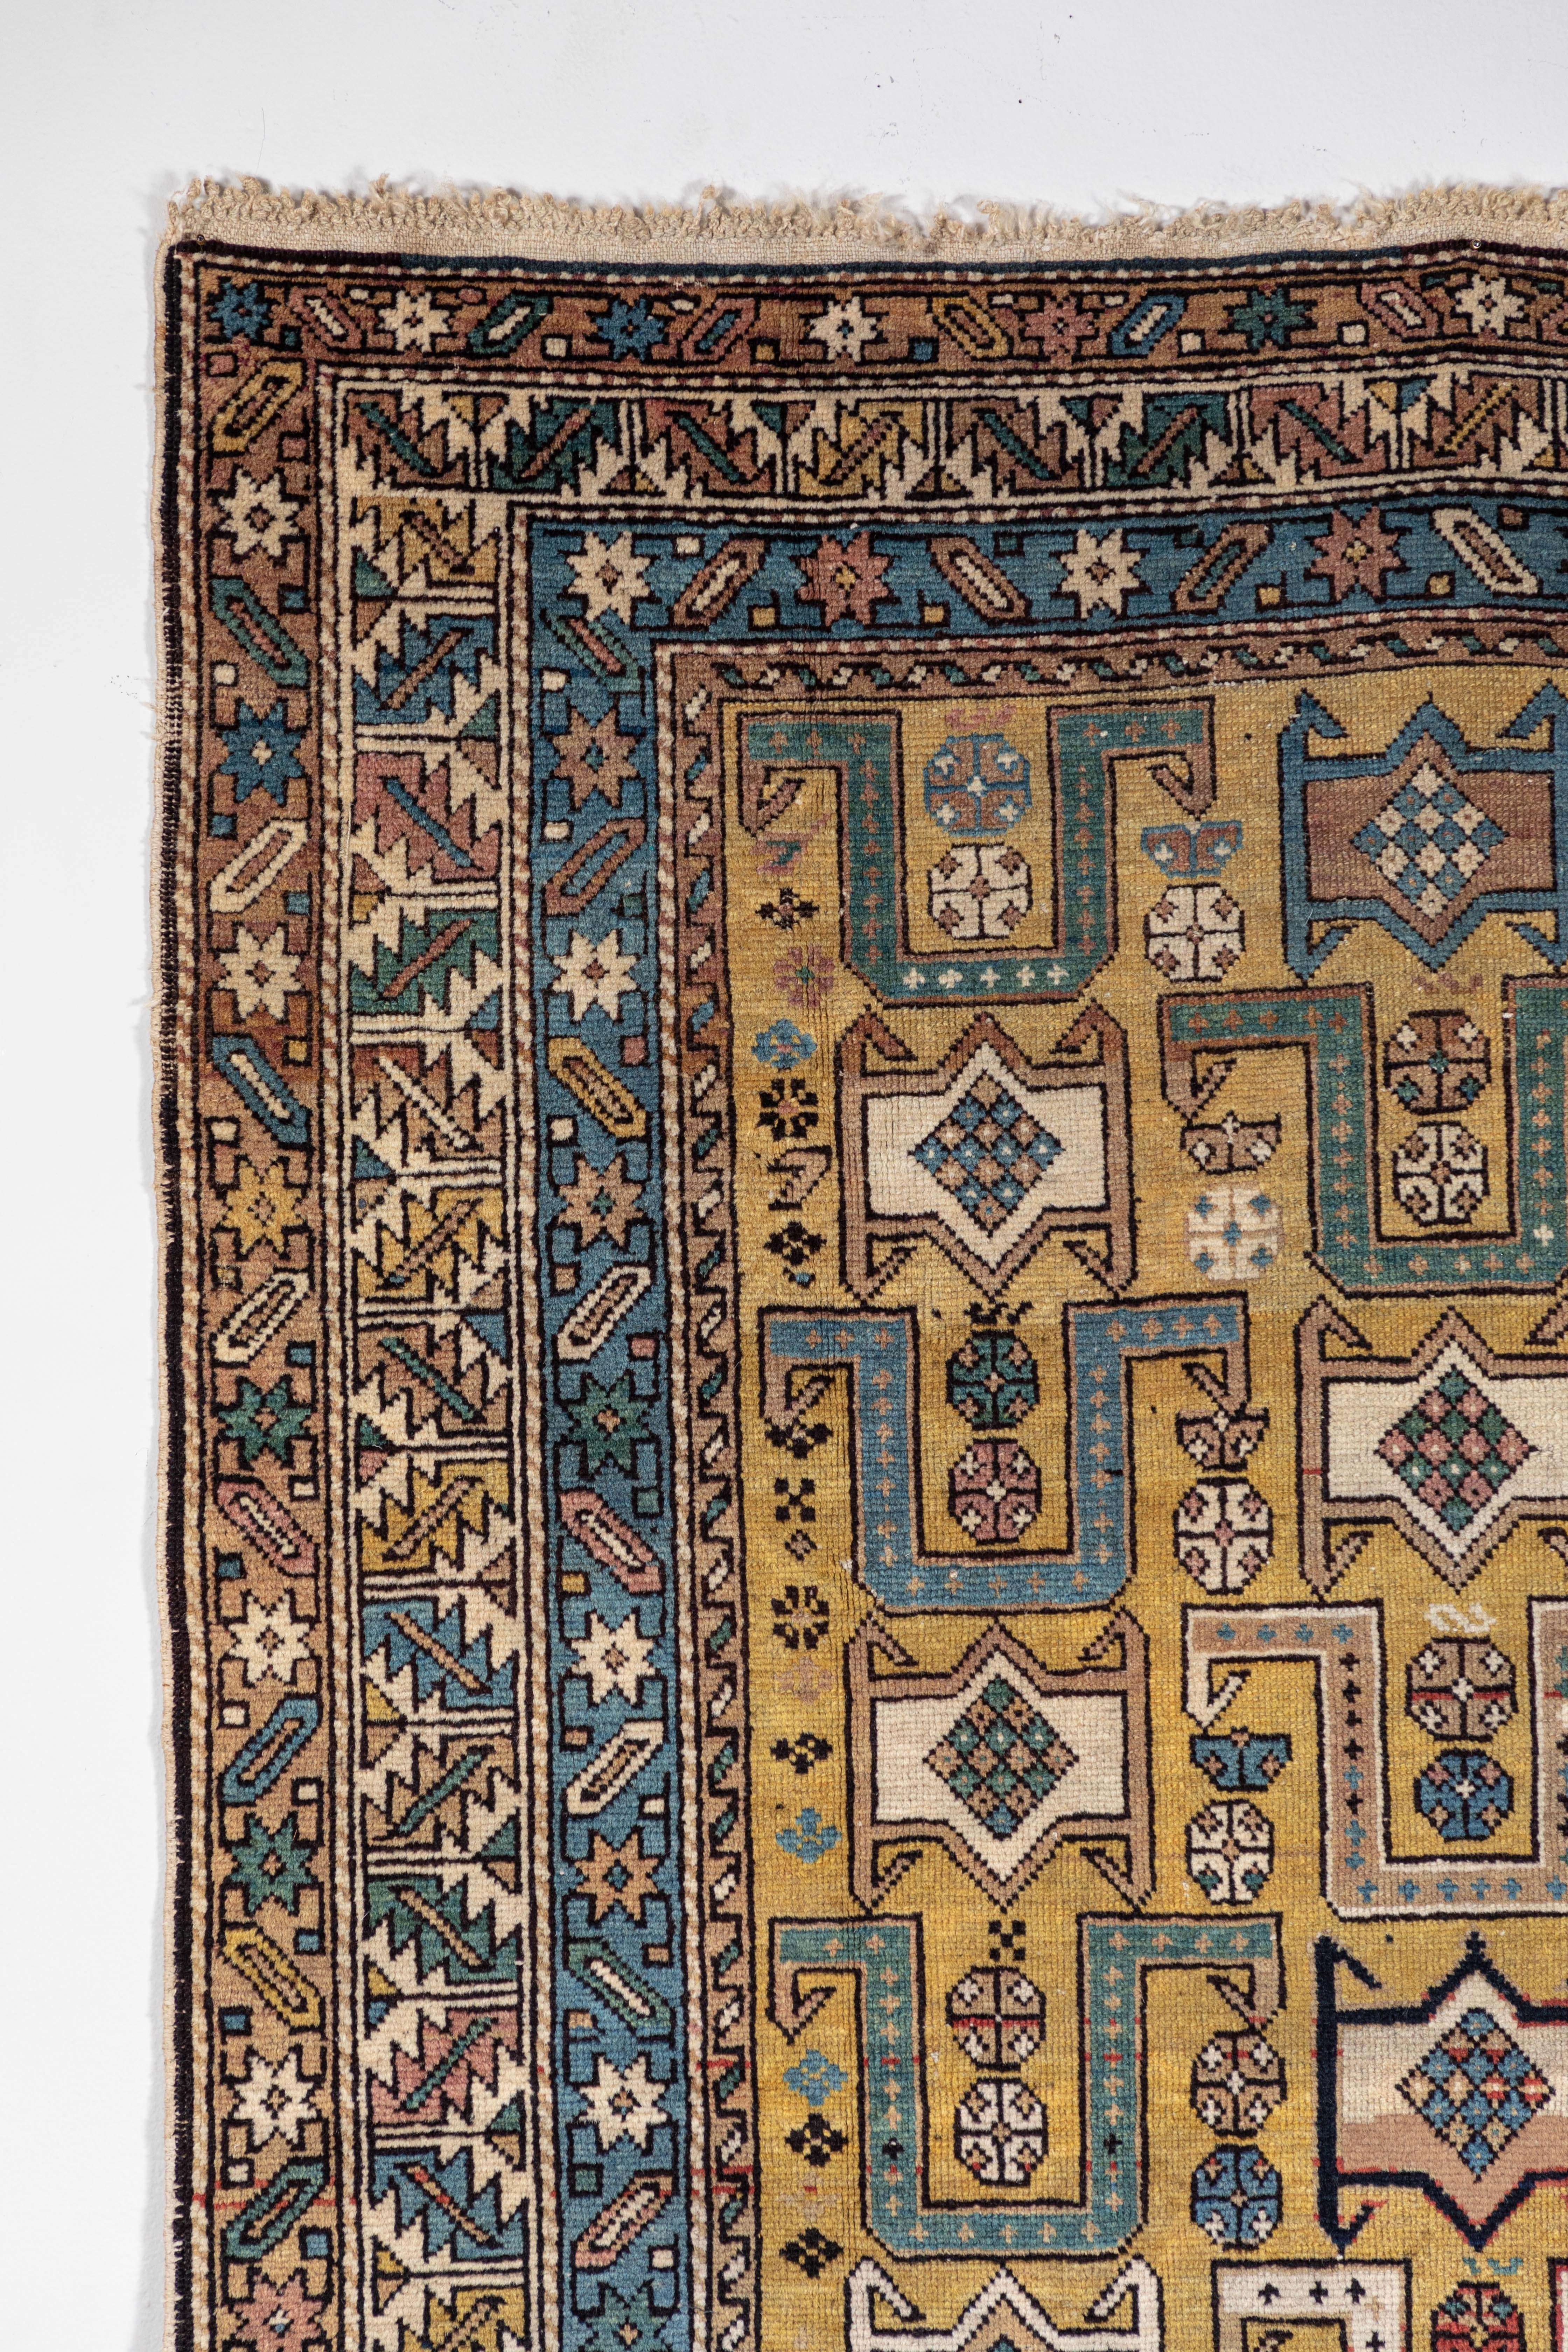 Antique Caucasian rug with unusual color palette. Even pile, ends complete, few small damages as shown. Gold background with geometric and floral motifs. Red, ivory, blue, green, pink, brown, orange.